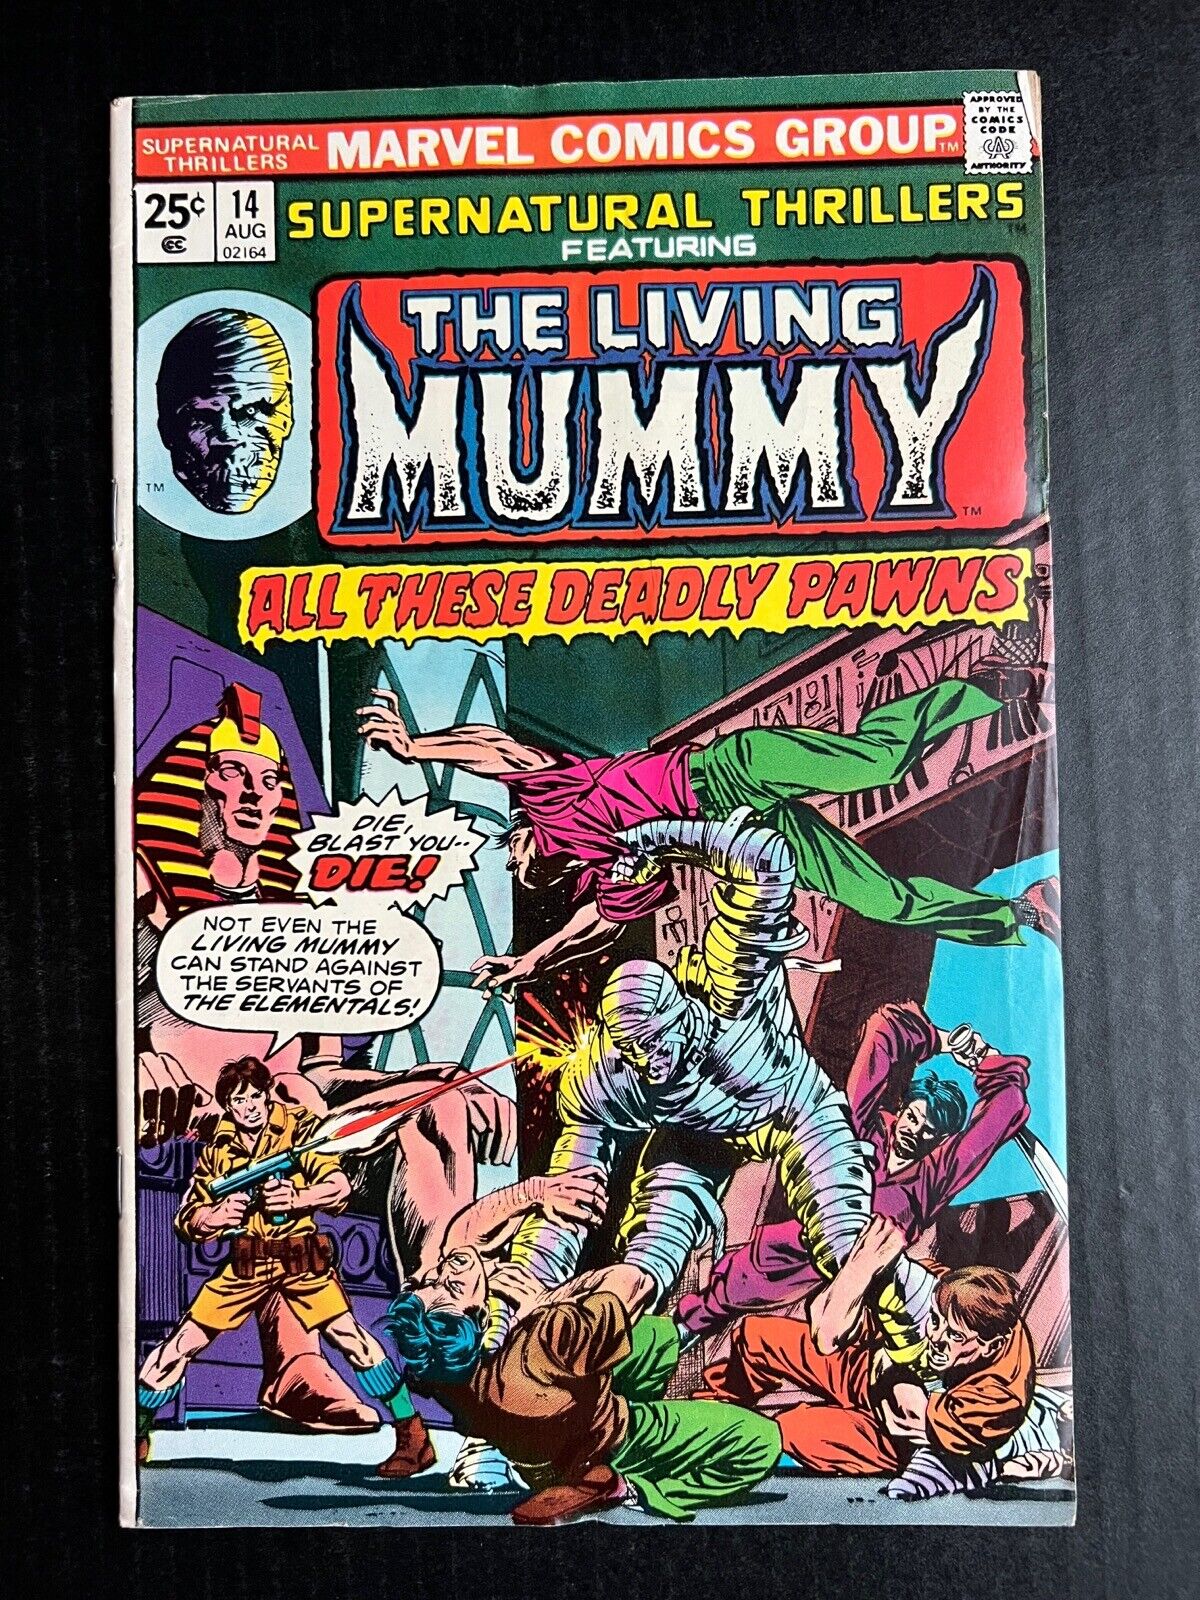 SUPERNATURAL THRILLERS #14 Featuring The Living Mummy August 1975 Marvel 